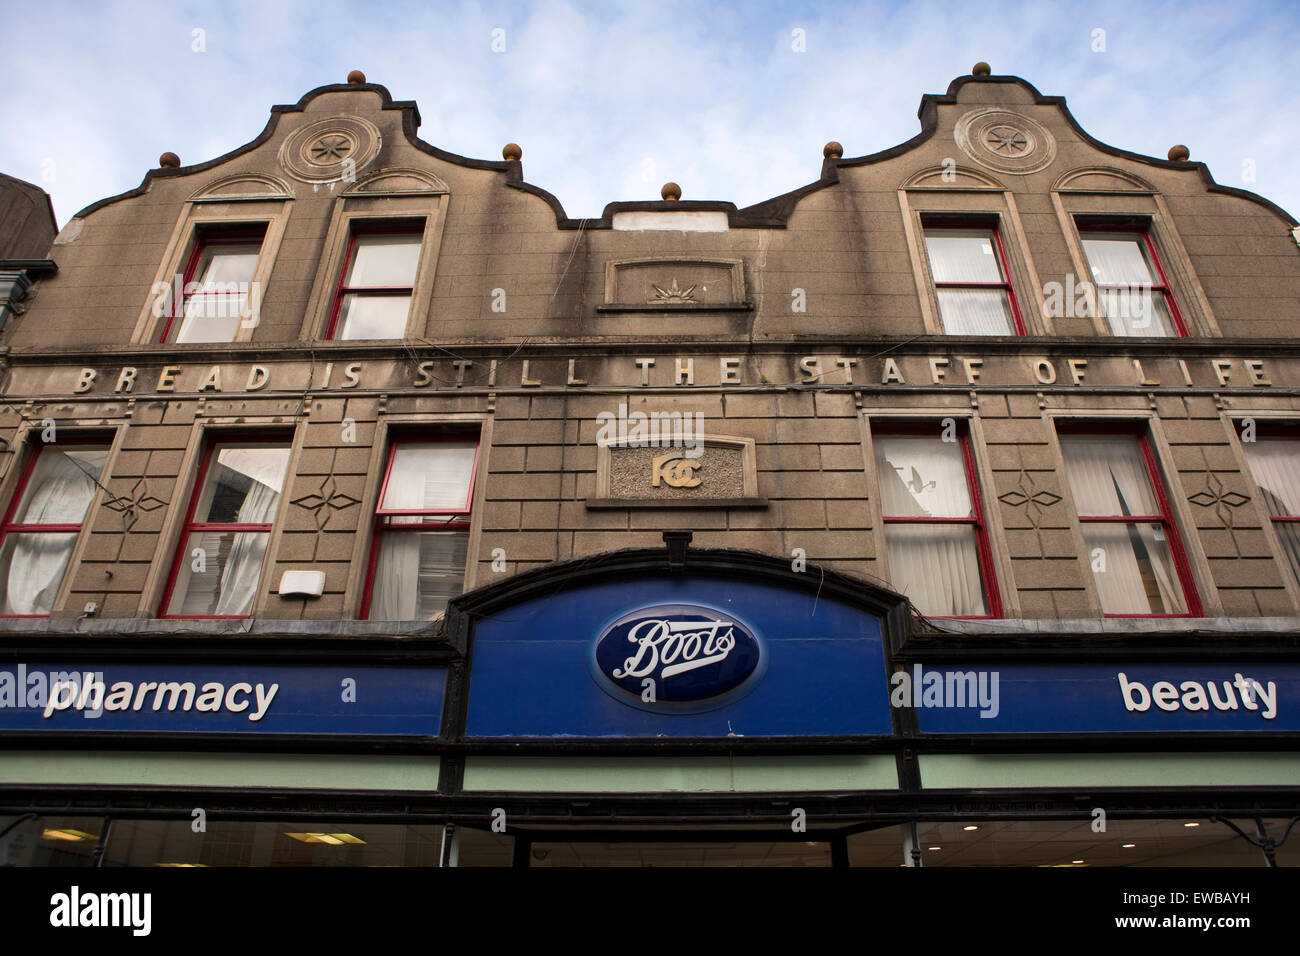 Ireland, Co Wexford,  Town, Main Street South, bread is still the staff of life sign above boots pharmacy entrance Stock Photo